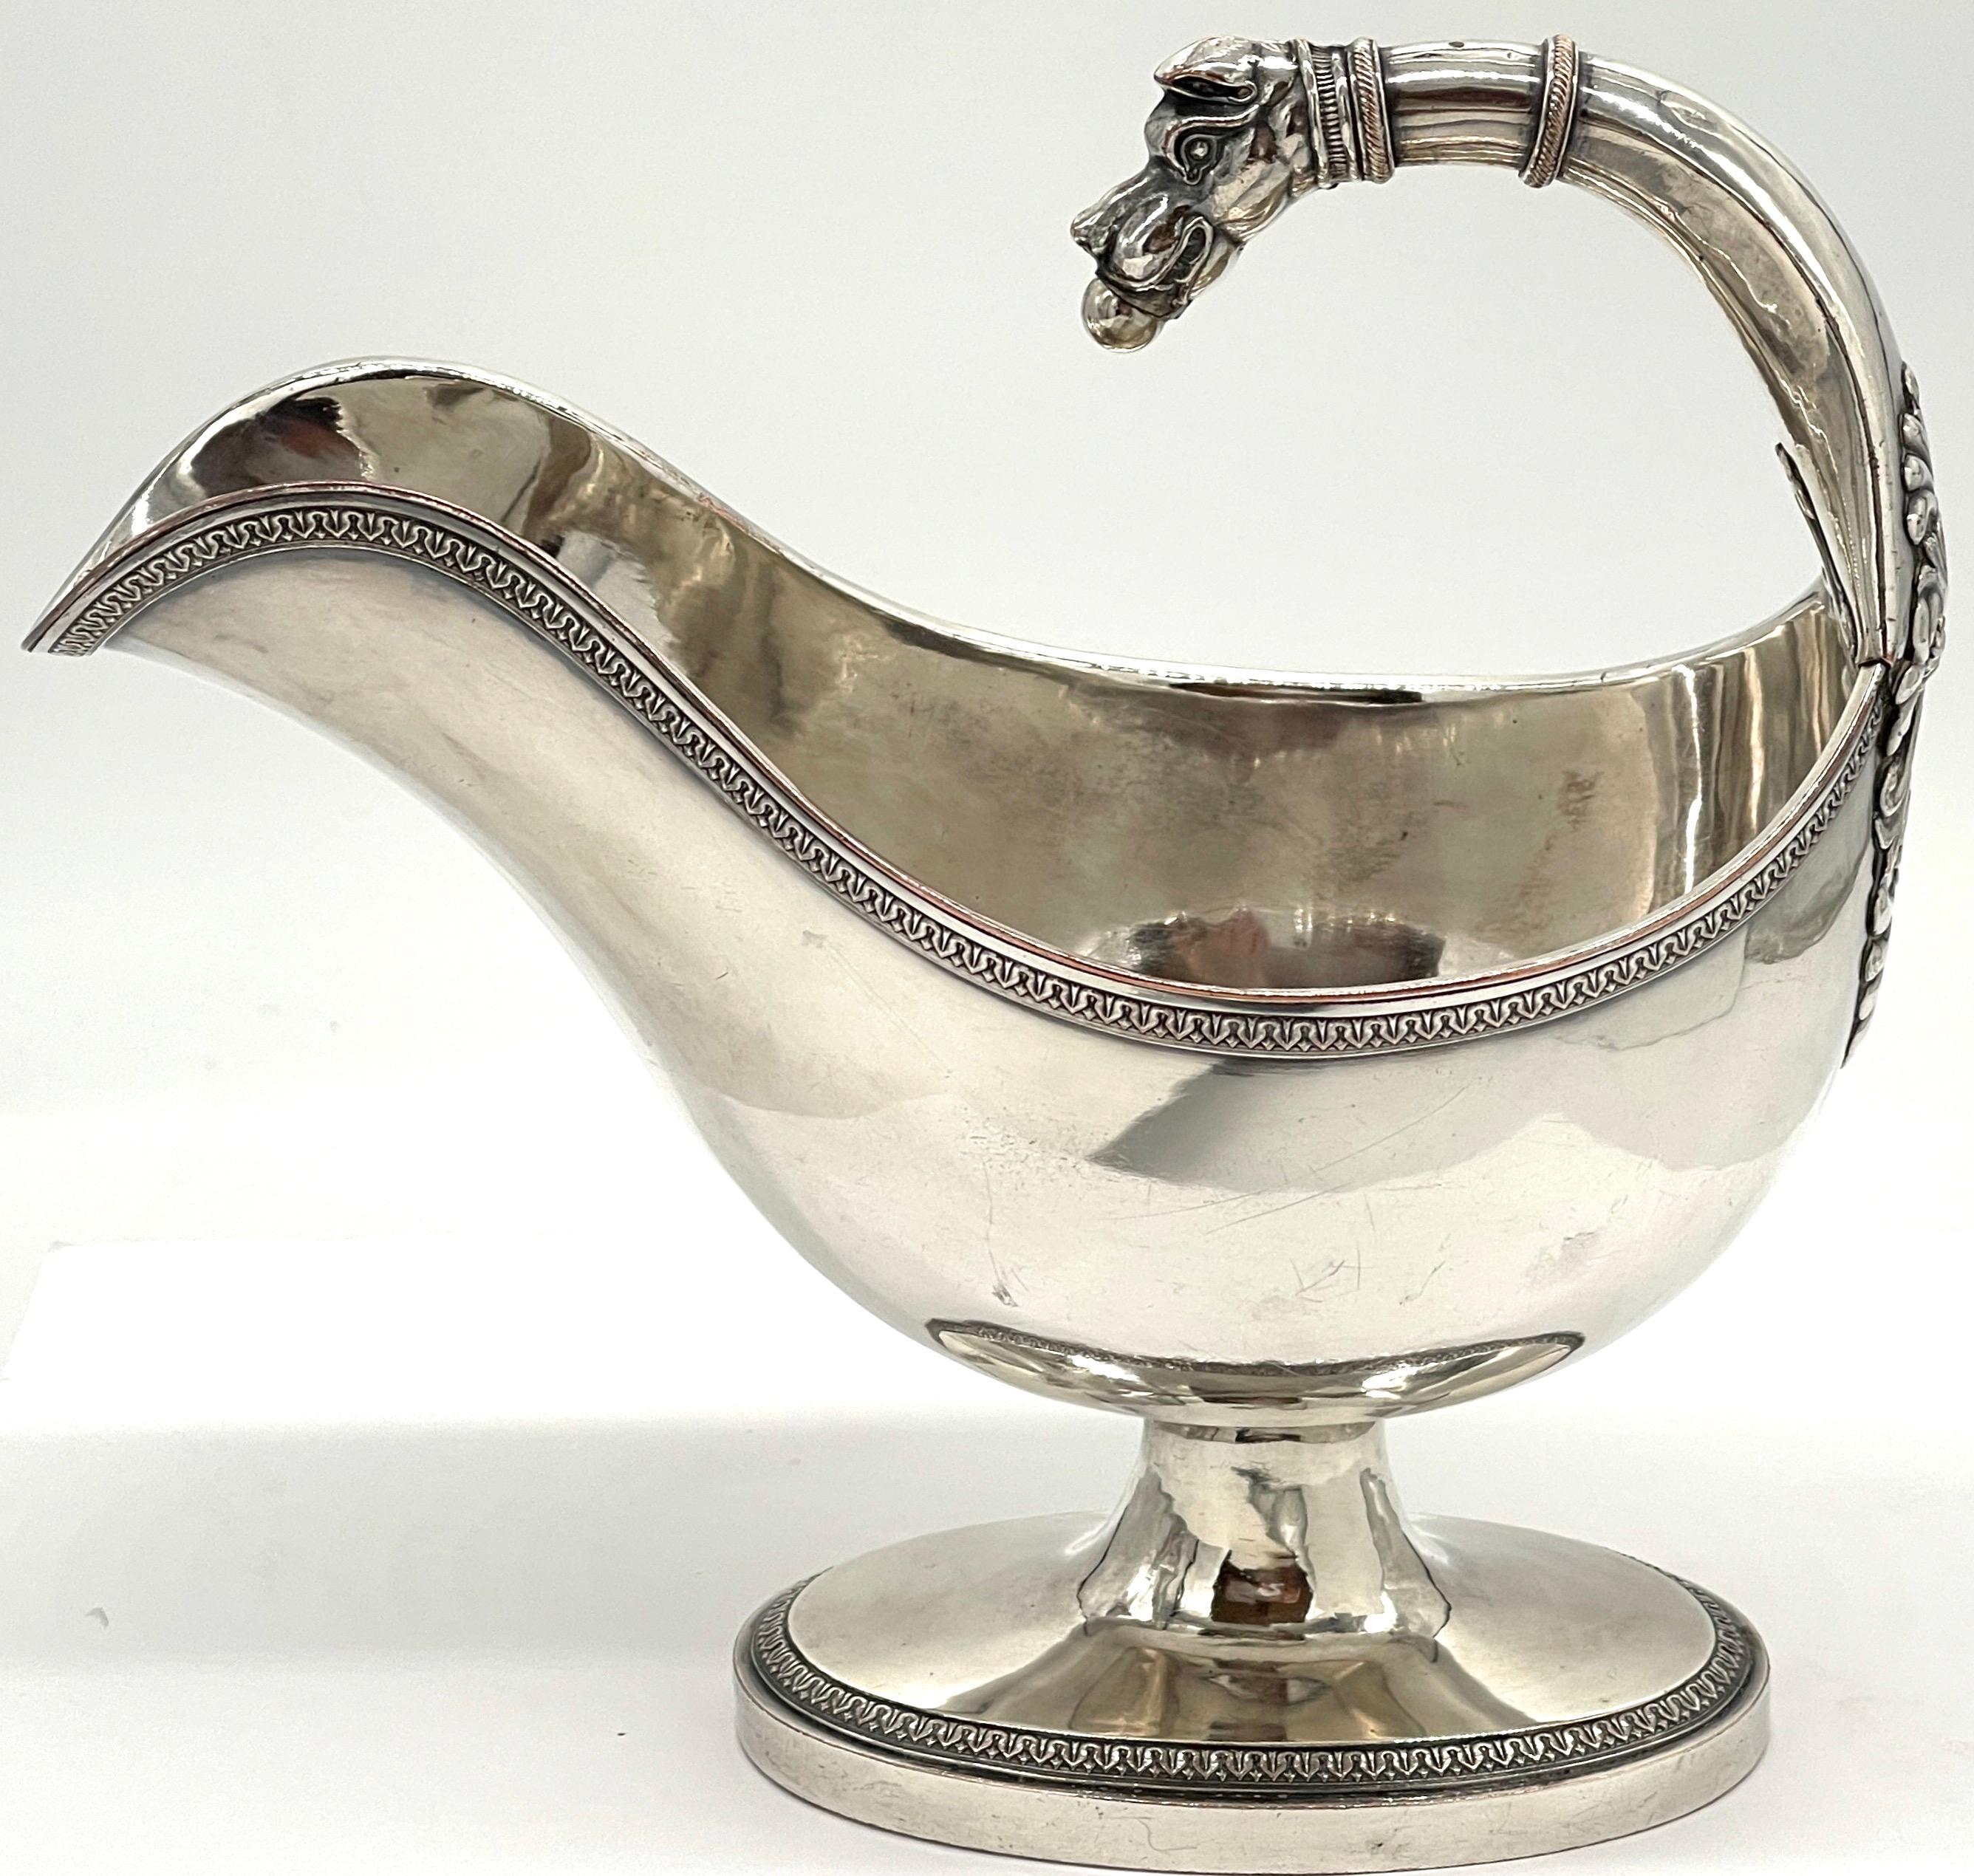 Neoclassical 19th Century French Silverplated Christofle Style Dog Motif Gravy/ Sauce Boat